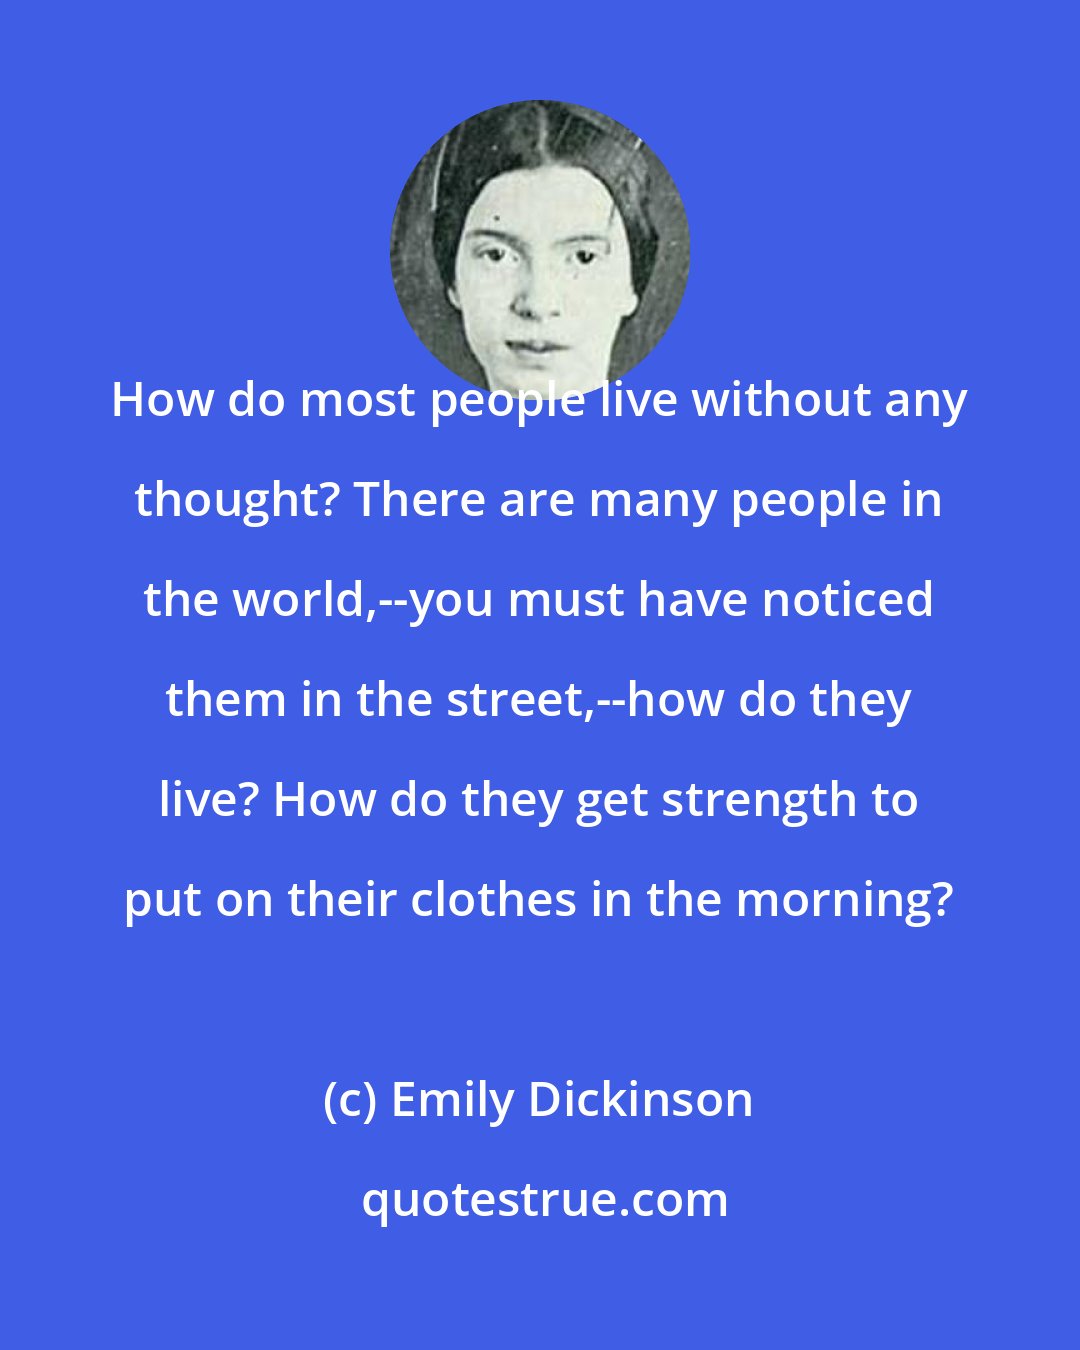 Emily Dickinson: How do most people live without any thought? There are many people in the world,--you must have noticed them in the street,--how do they live? How do they get strength to put on their clothes in the morning?